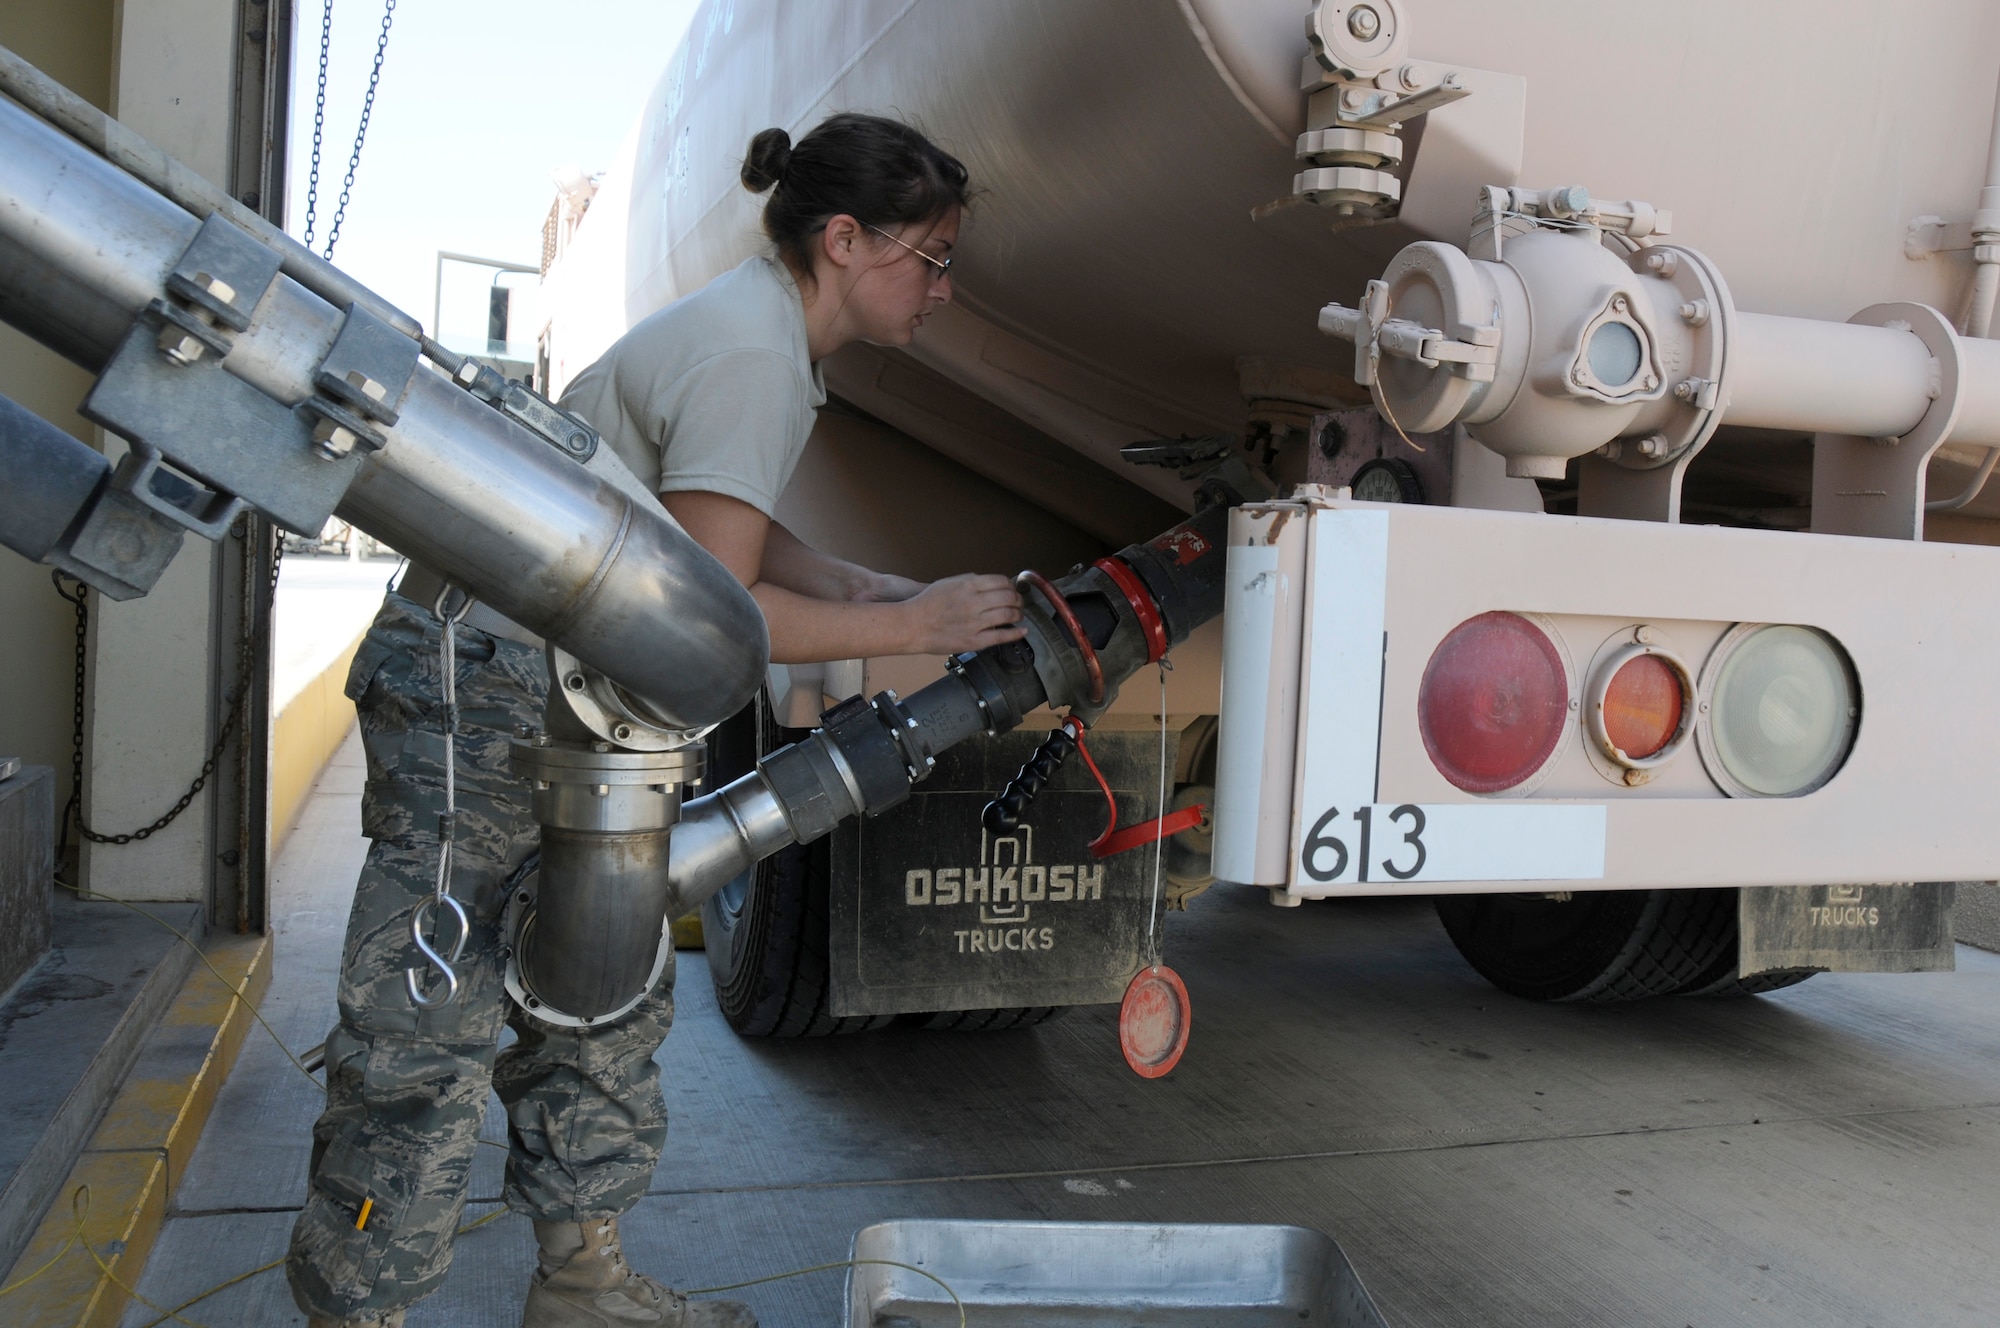 SOUTHWEST ASIA -- Senior Airman Jaclyn Laws, 380th Expeditionary Logistics Readiness Squadron fuels distribution operator hooks up an R-11 fuel truck to a fillstand, Jan 21. The fillstand gets fuel from the storage facility to replenish each fuel truck. On average the 380th ELRS fuels flight pumps 520,000 gallons a day into aricraft throughout Southwest Asia. Airman Laws is deployed from Eglin AFB, Fla. (U.S. Air Force photo by Senior Airman Brian J. Ellis) (Released)